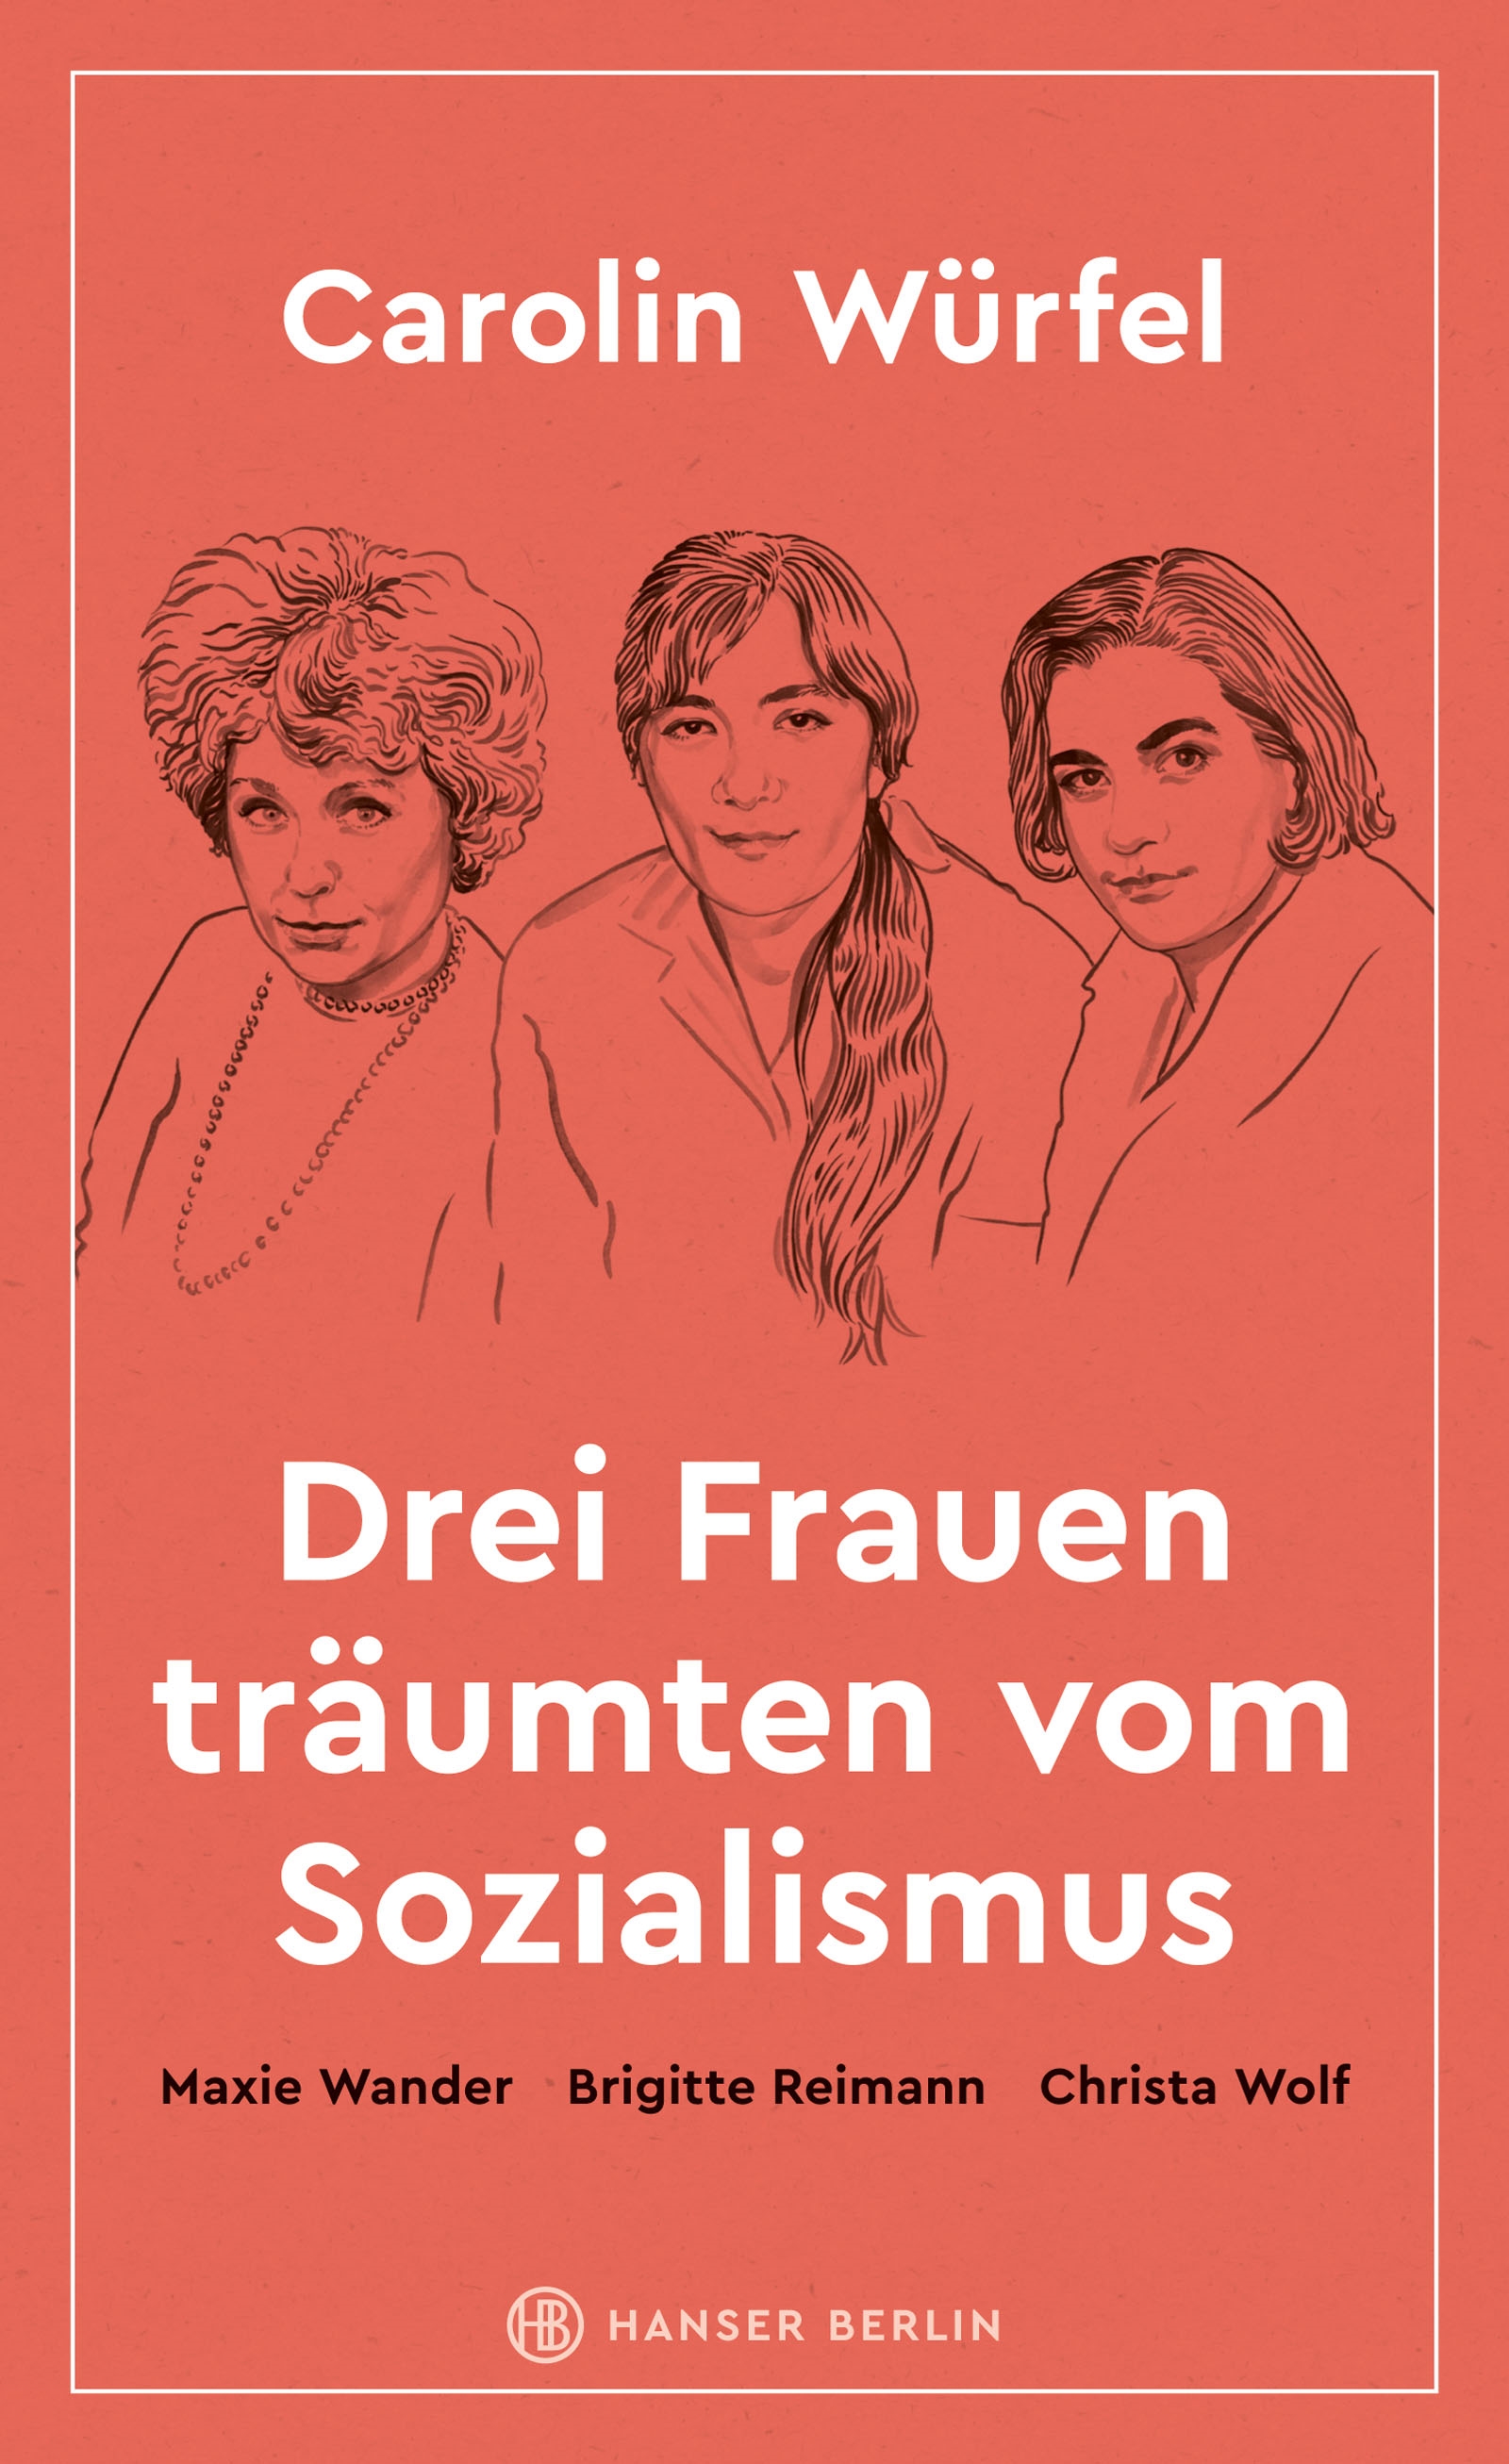 Three Women Who Dreamed of Socialism